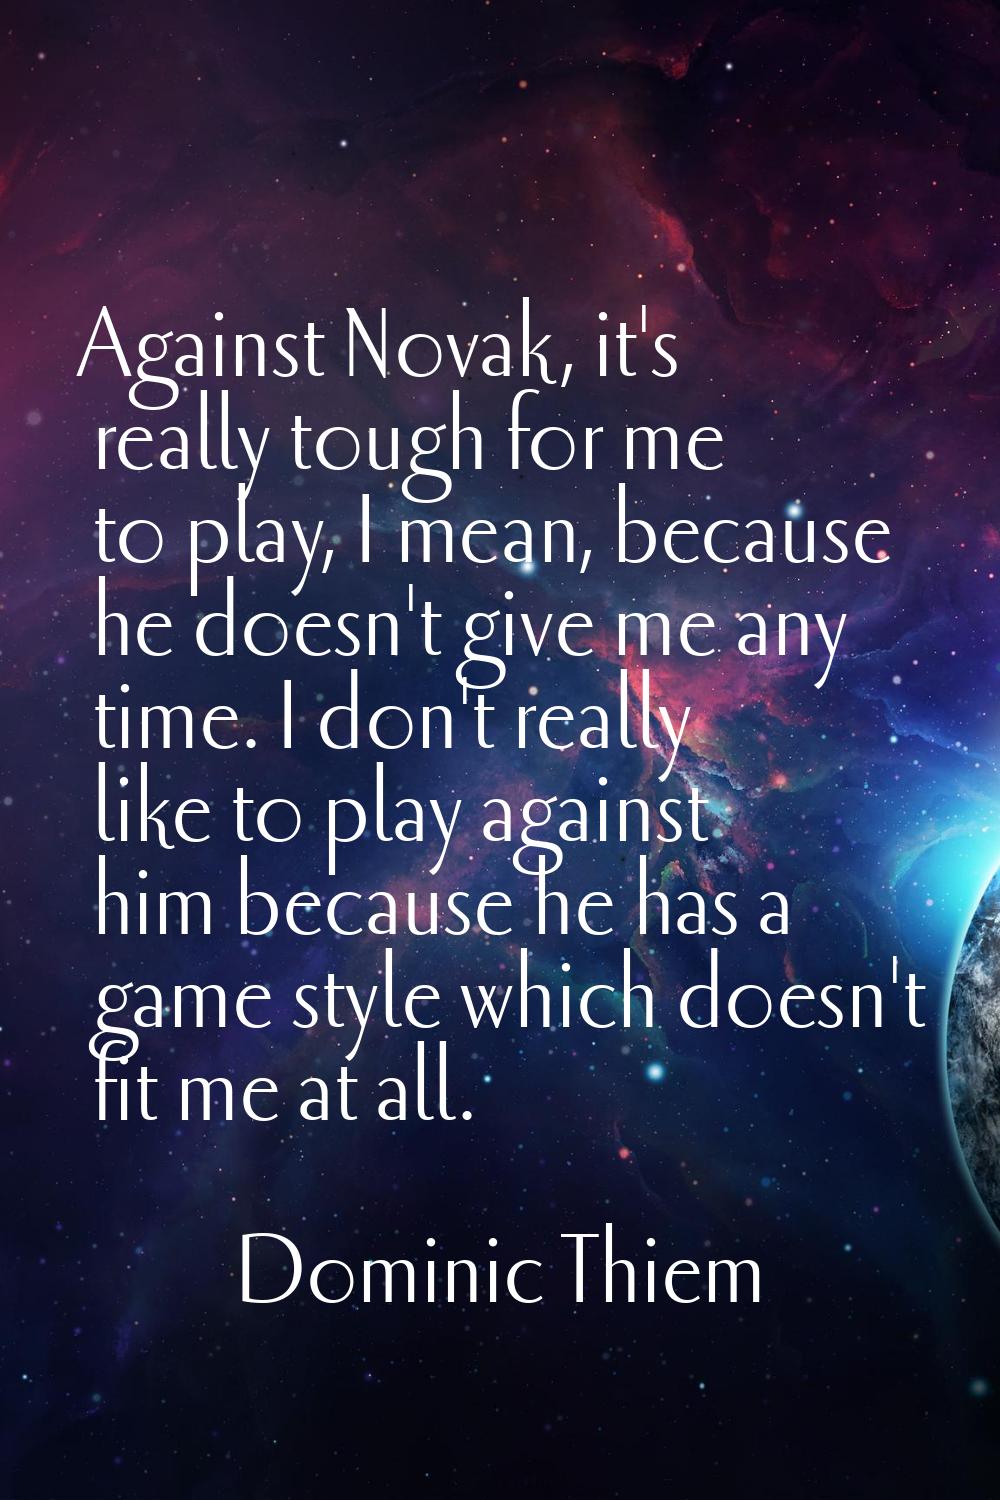 Against Novak, it's really tough for me to play, I mean, because he doesn't give me any time. I don